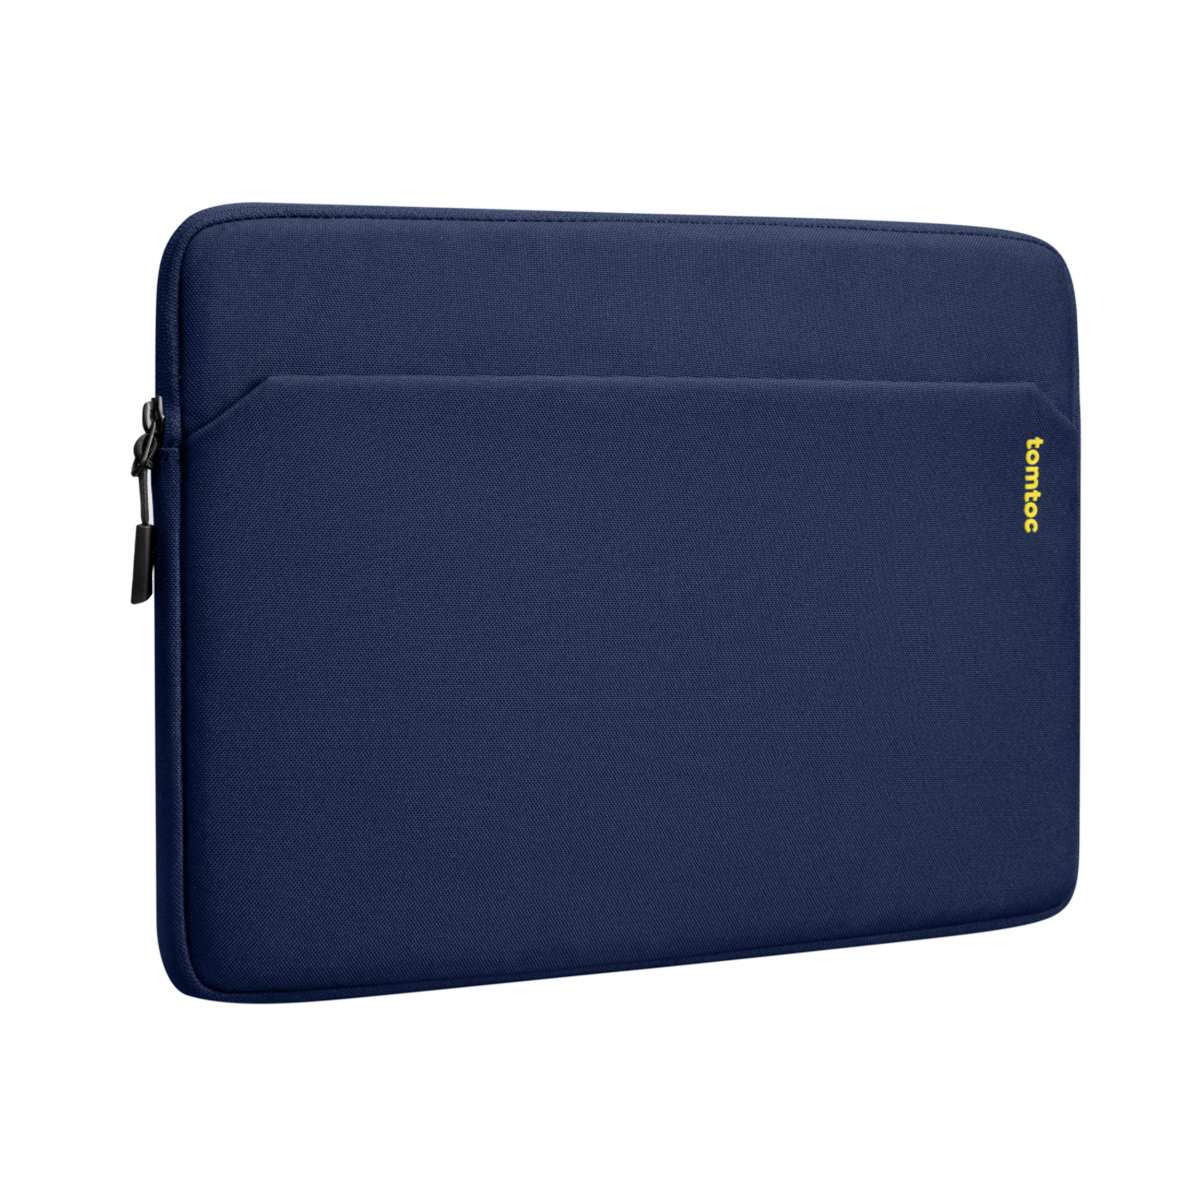  TÚI TOMTOC SLIM LAPTOP SLEEVE FOR 13-INCH MACBOOK AIR/PRO M2/M1 A18C2 